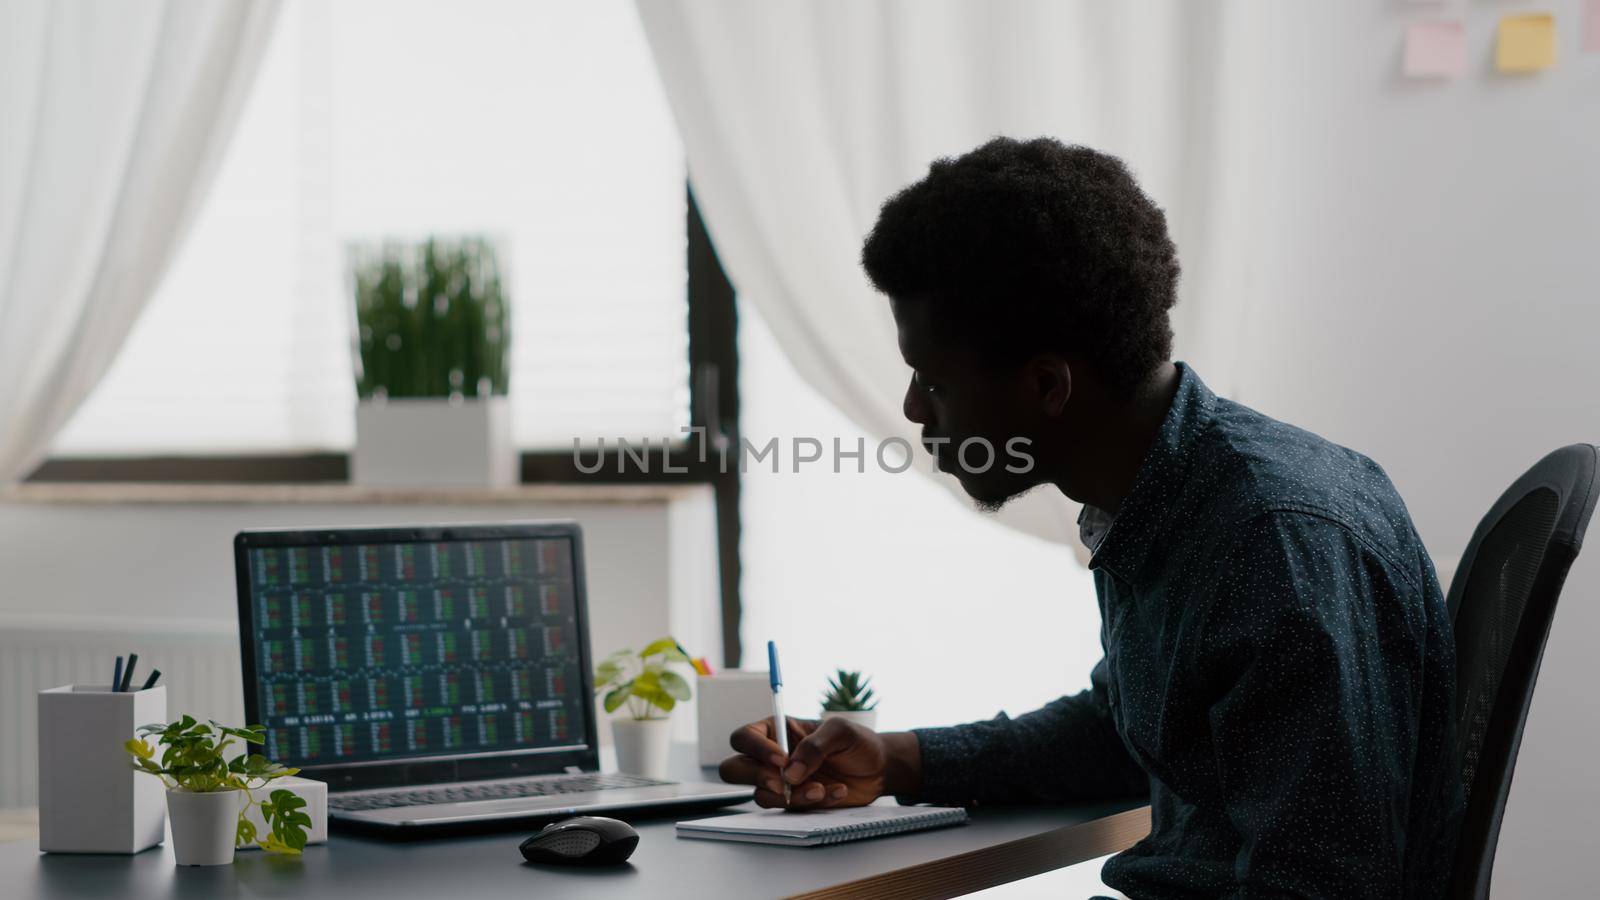 African american man analysing crypto currency stock markets trading checking stock ticker index, deciding to buy or sell digital coin money. Watching bitcoin charts forex investment finance exchange